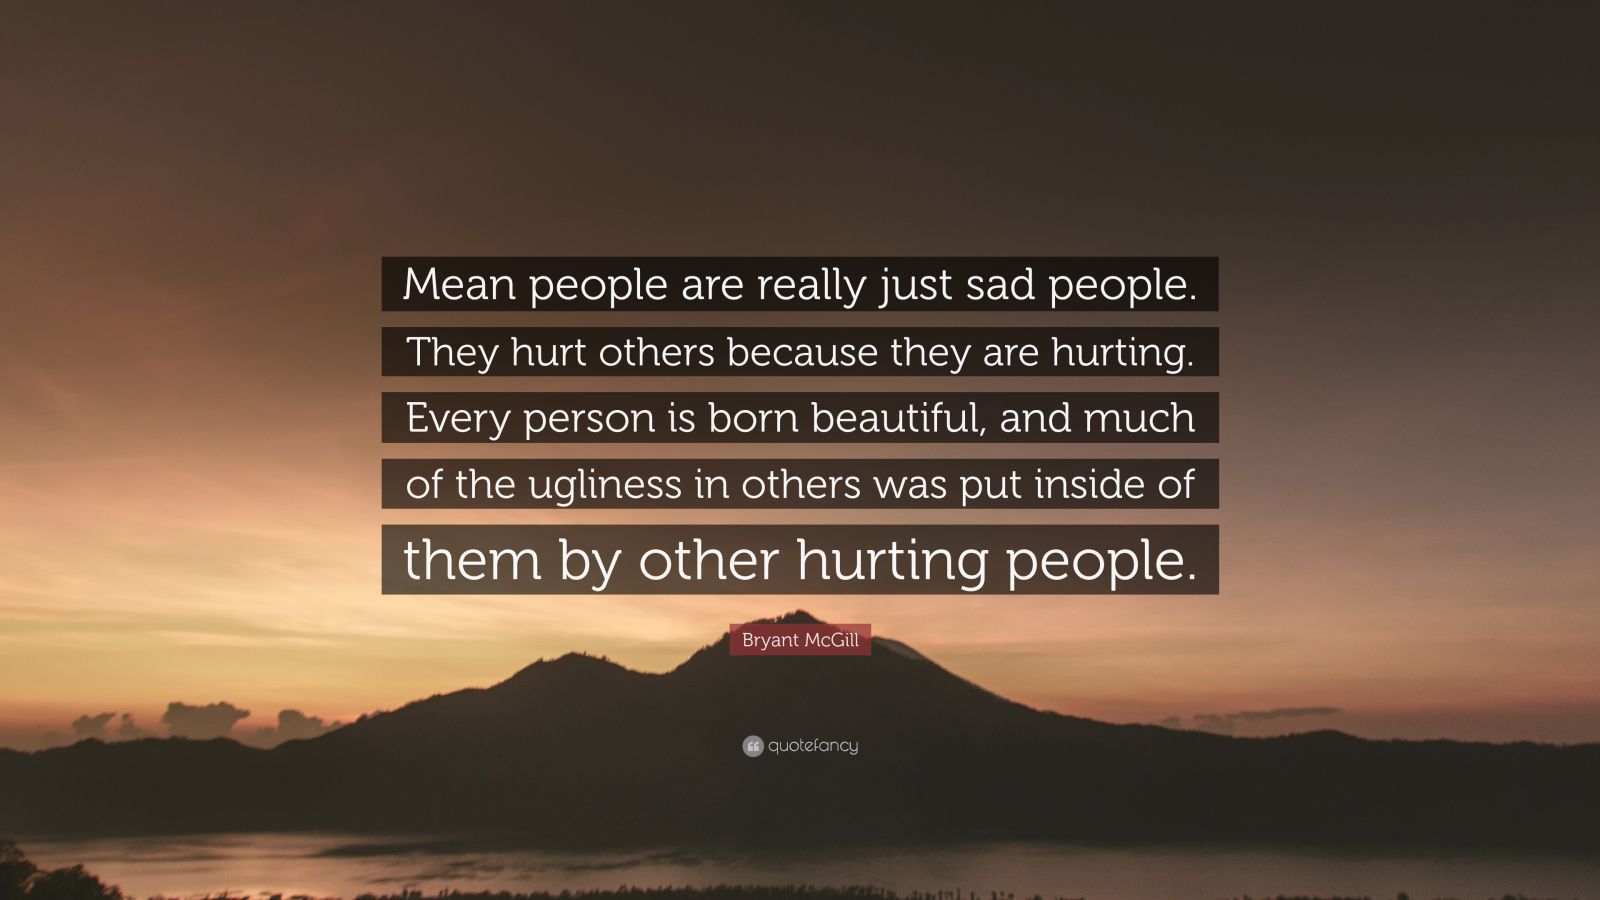 Bryant McGill Quote: “Mean people are really just sad people. They hurt